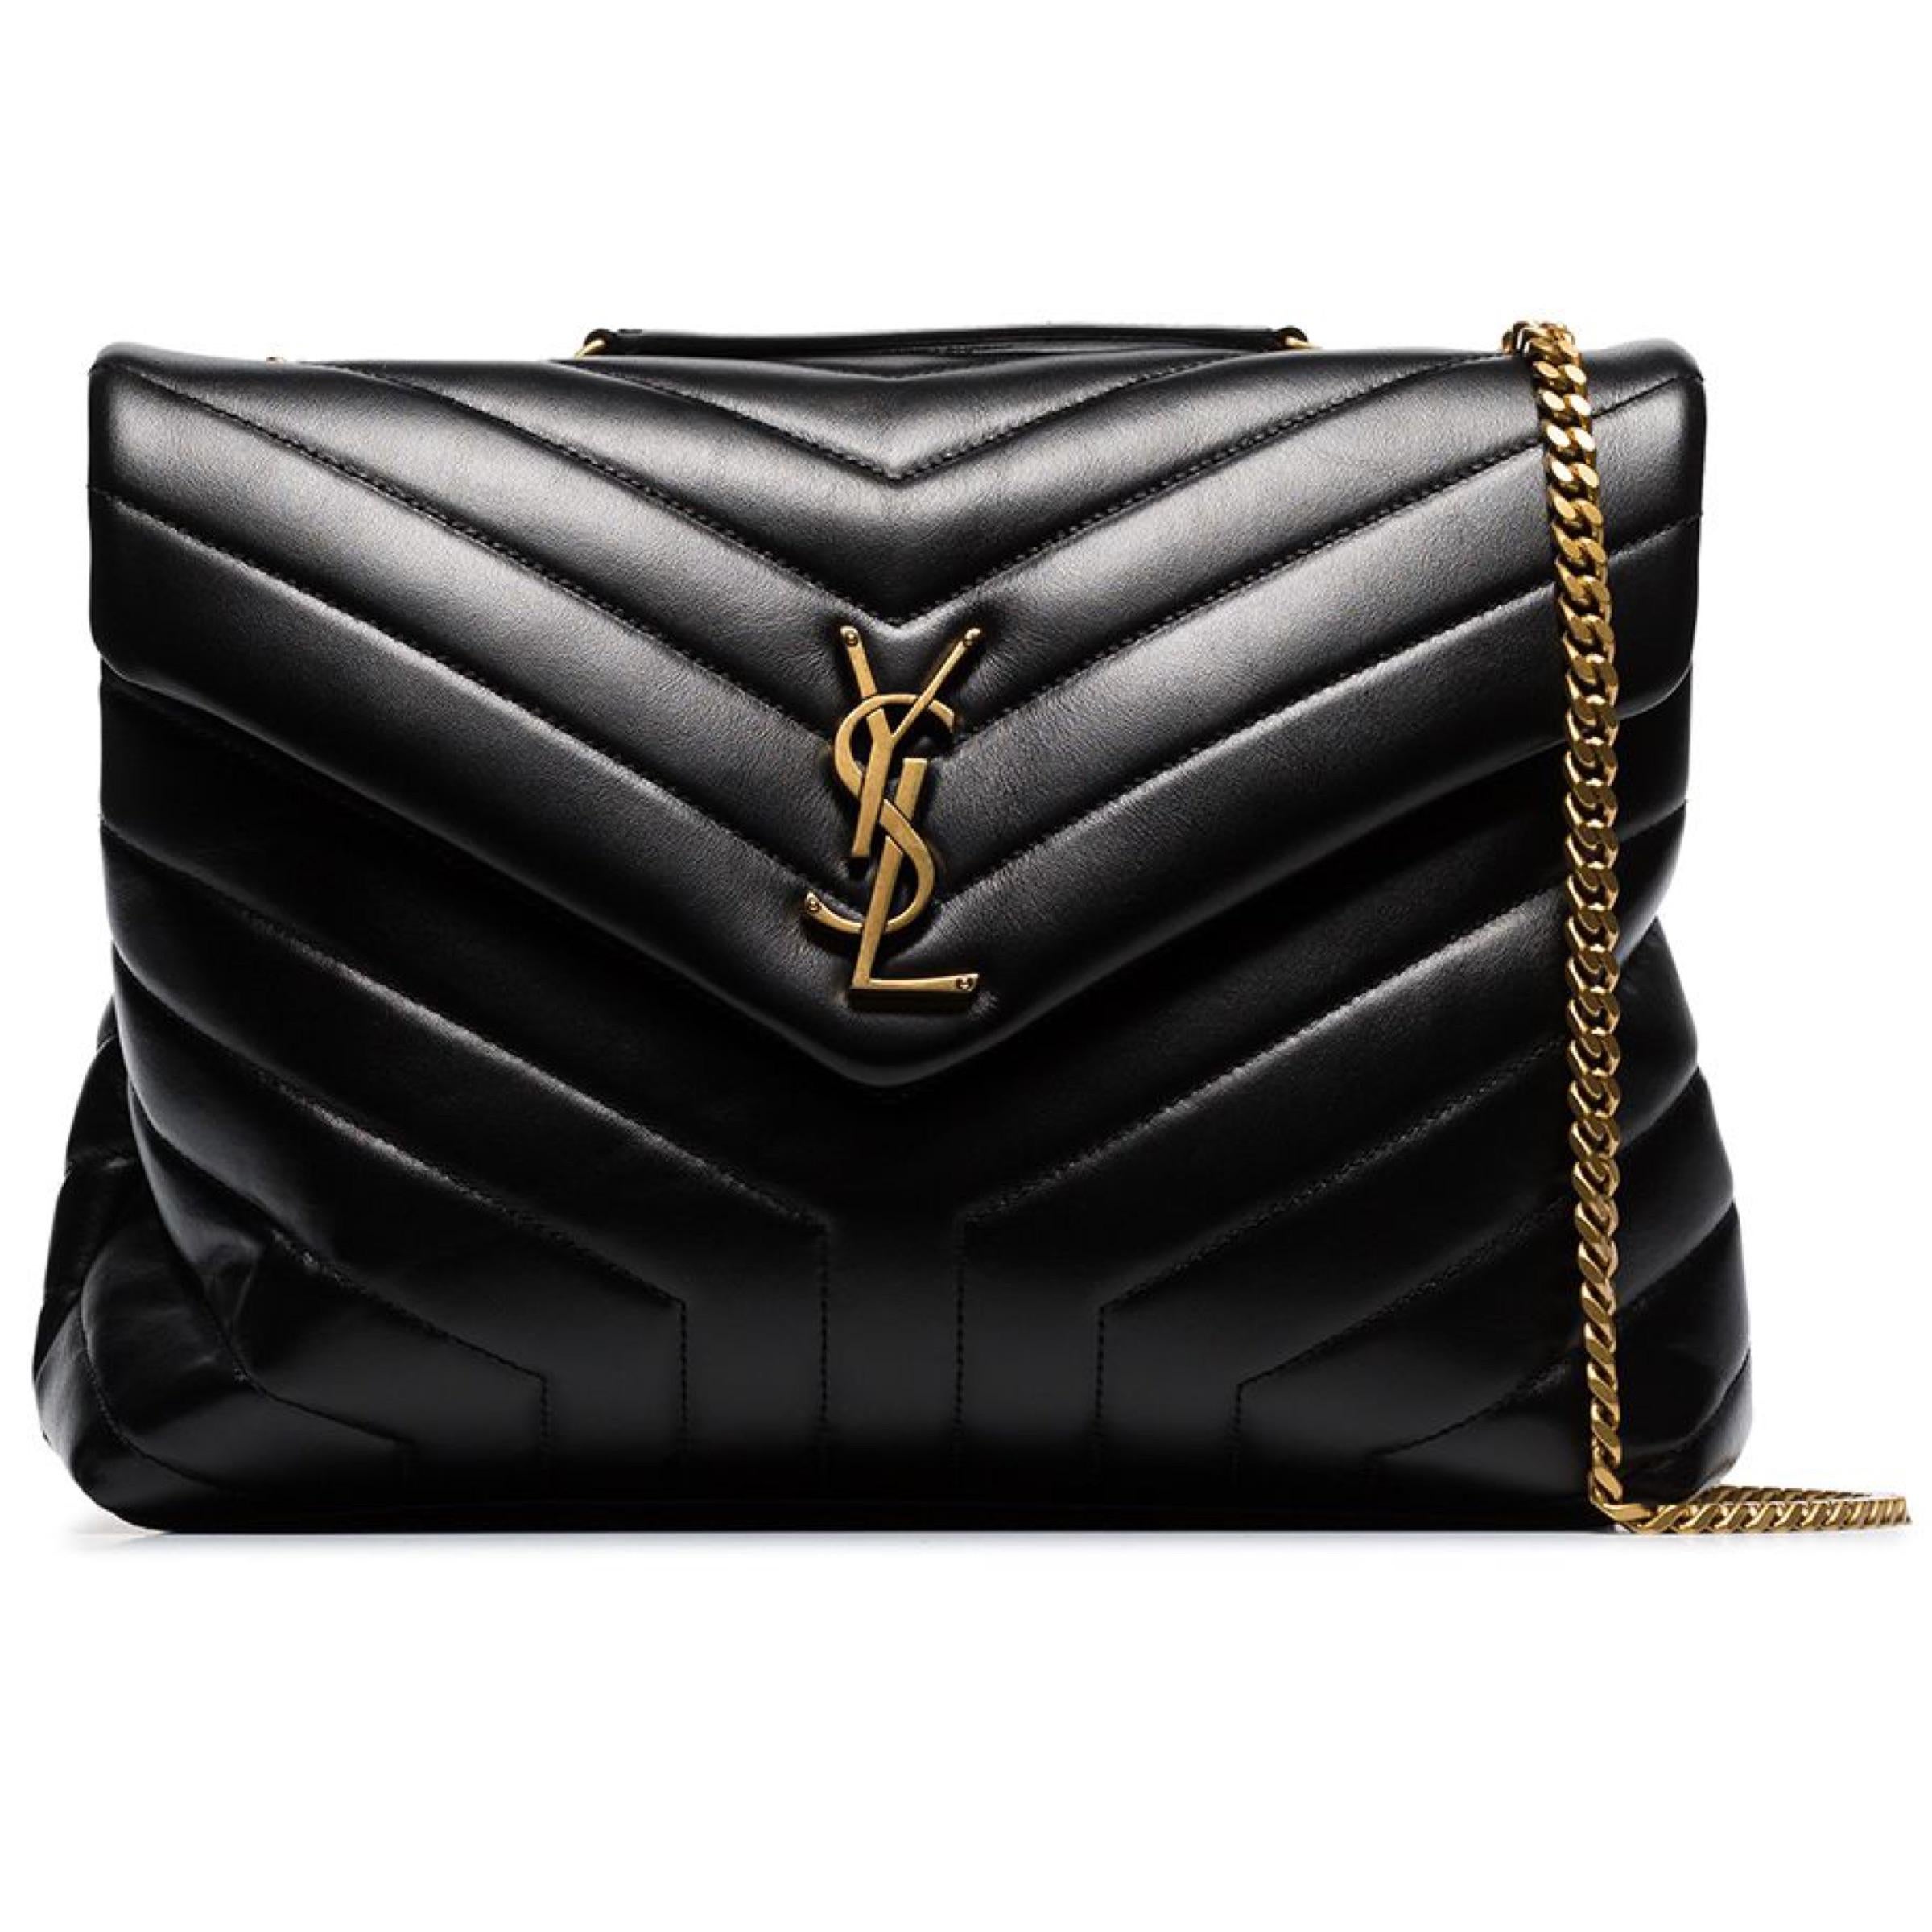 New Saint Laurent Black Medium Loulou Quilted Leather Shoulder Bag

Authenticity Guaranteed

DETAILS
Brand: Saint Laurent
Gender: Women
Category: Shoulder bag
Condition: Brand new
Color: Black
Material: Leather
Quilted leather
Gold-tone